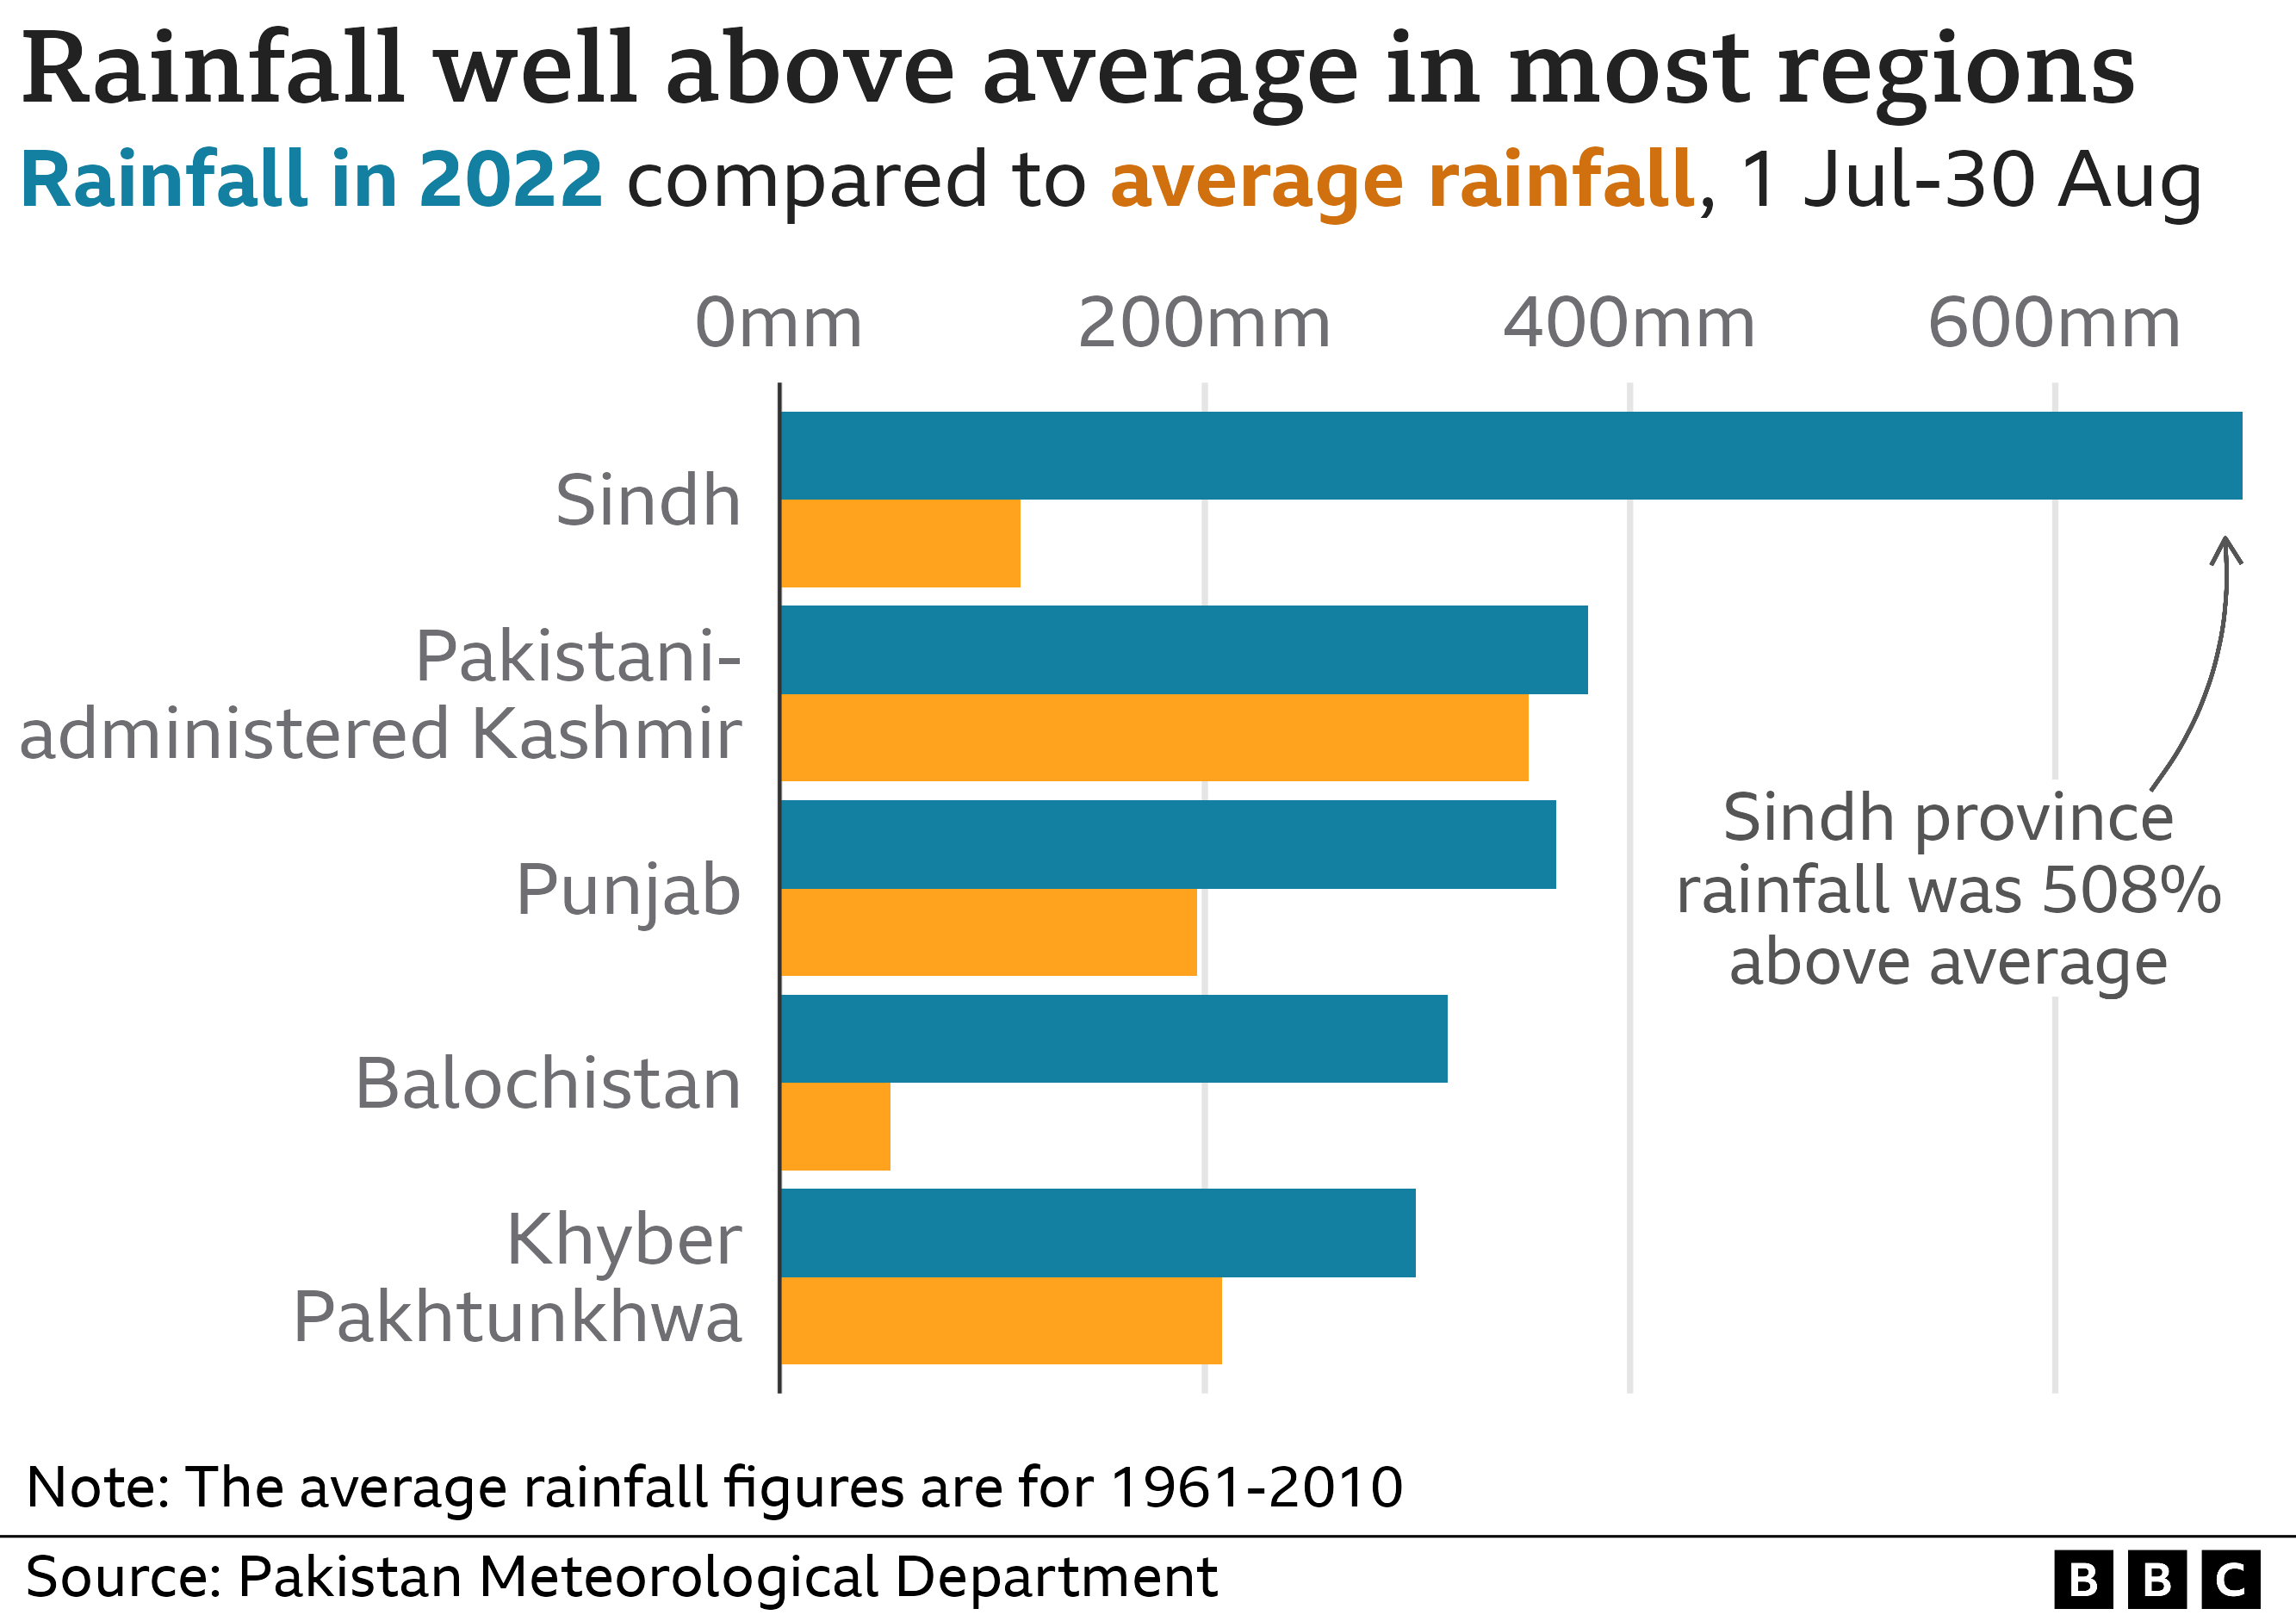 Figure 2 rainfall is well above average in most regions across Pakistan © BBC